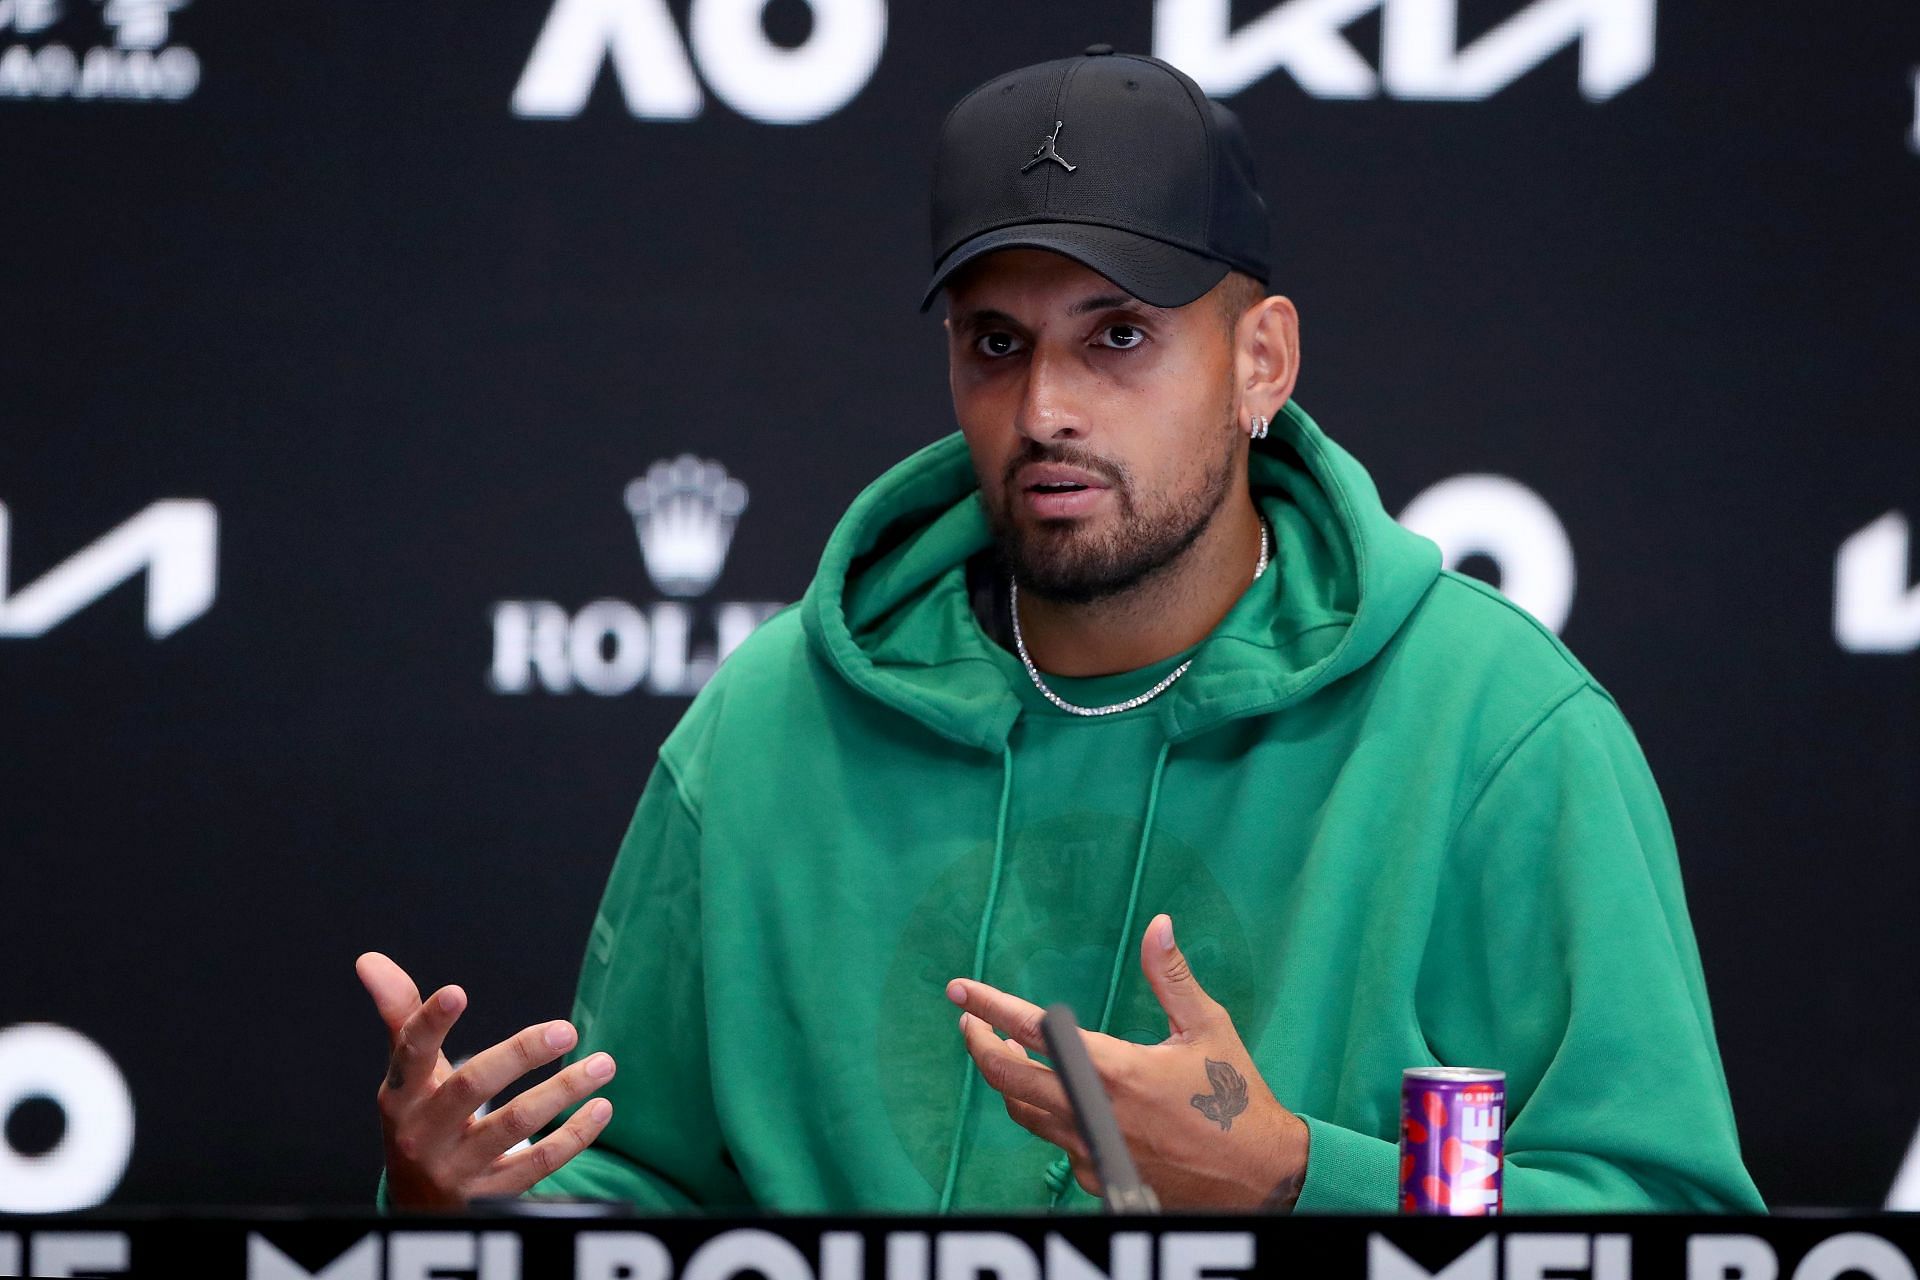 Kyrgios speaking at a press conference